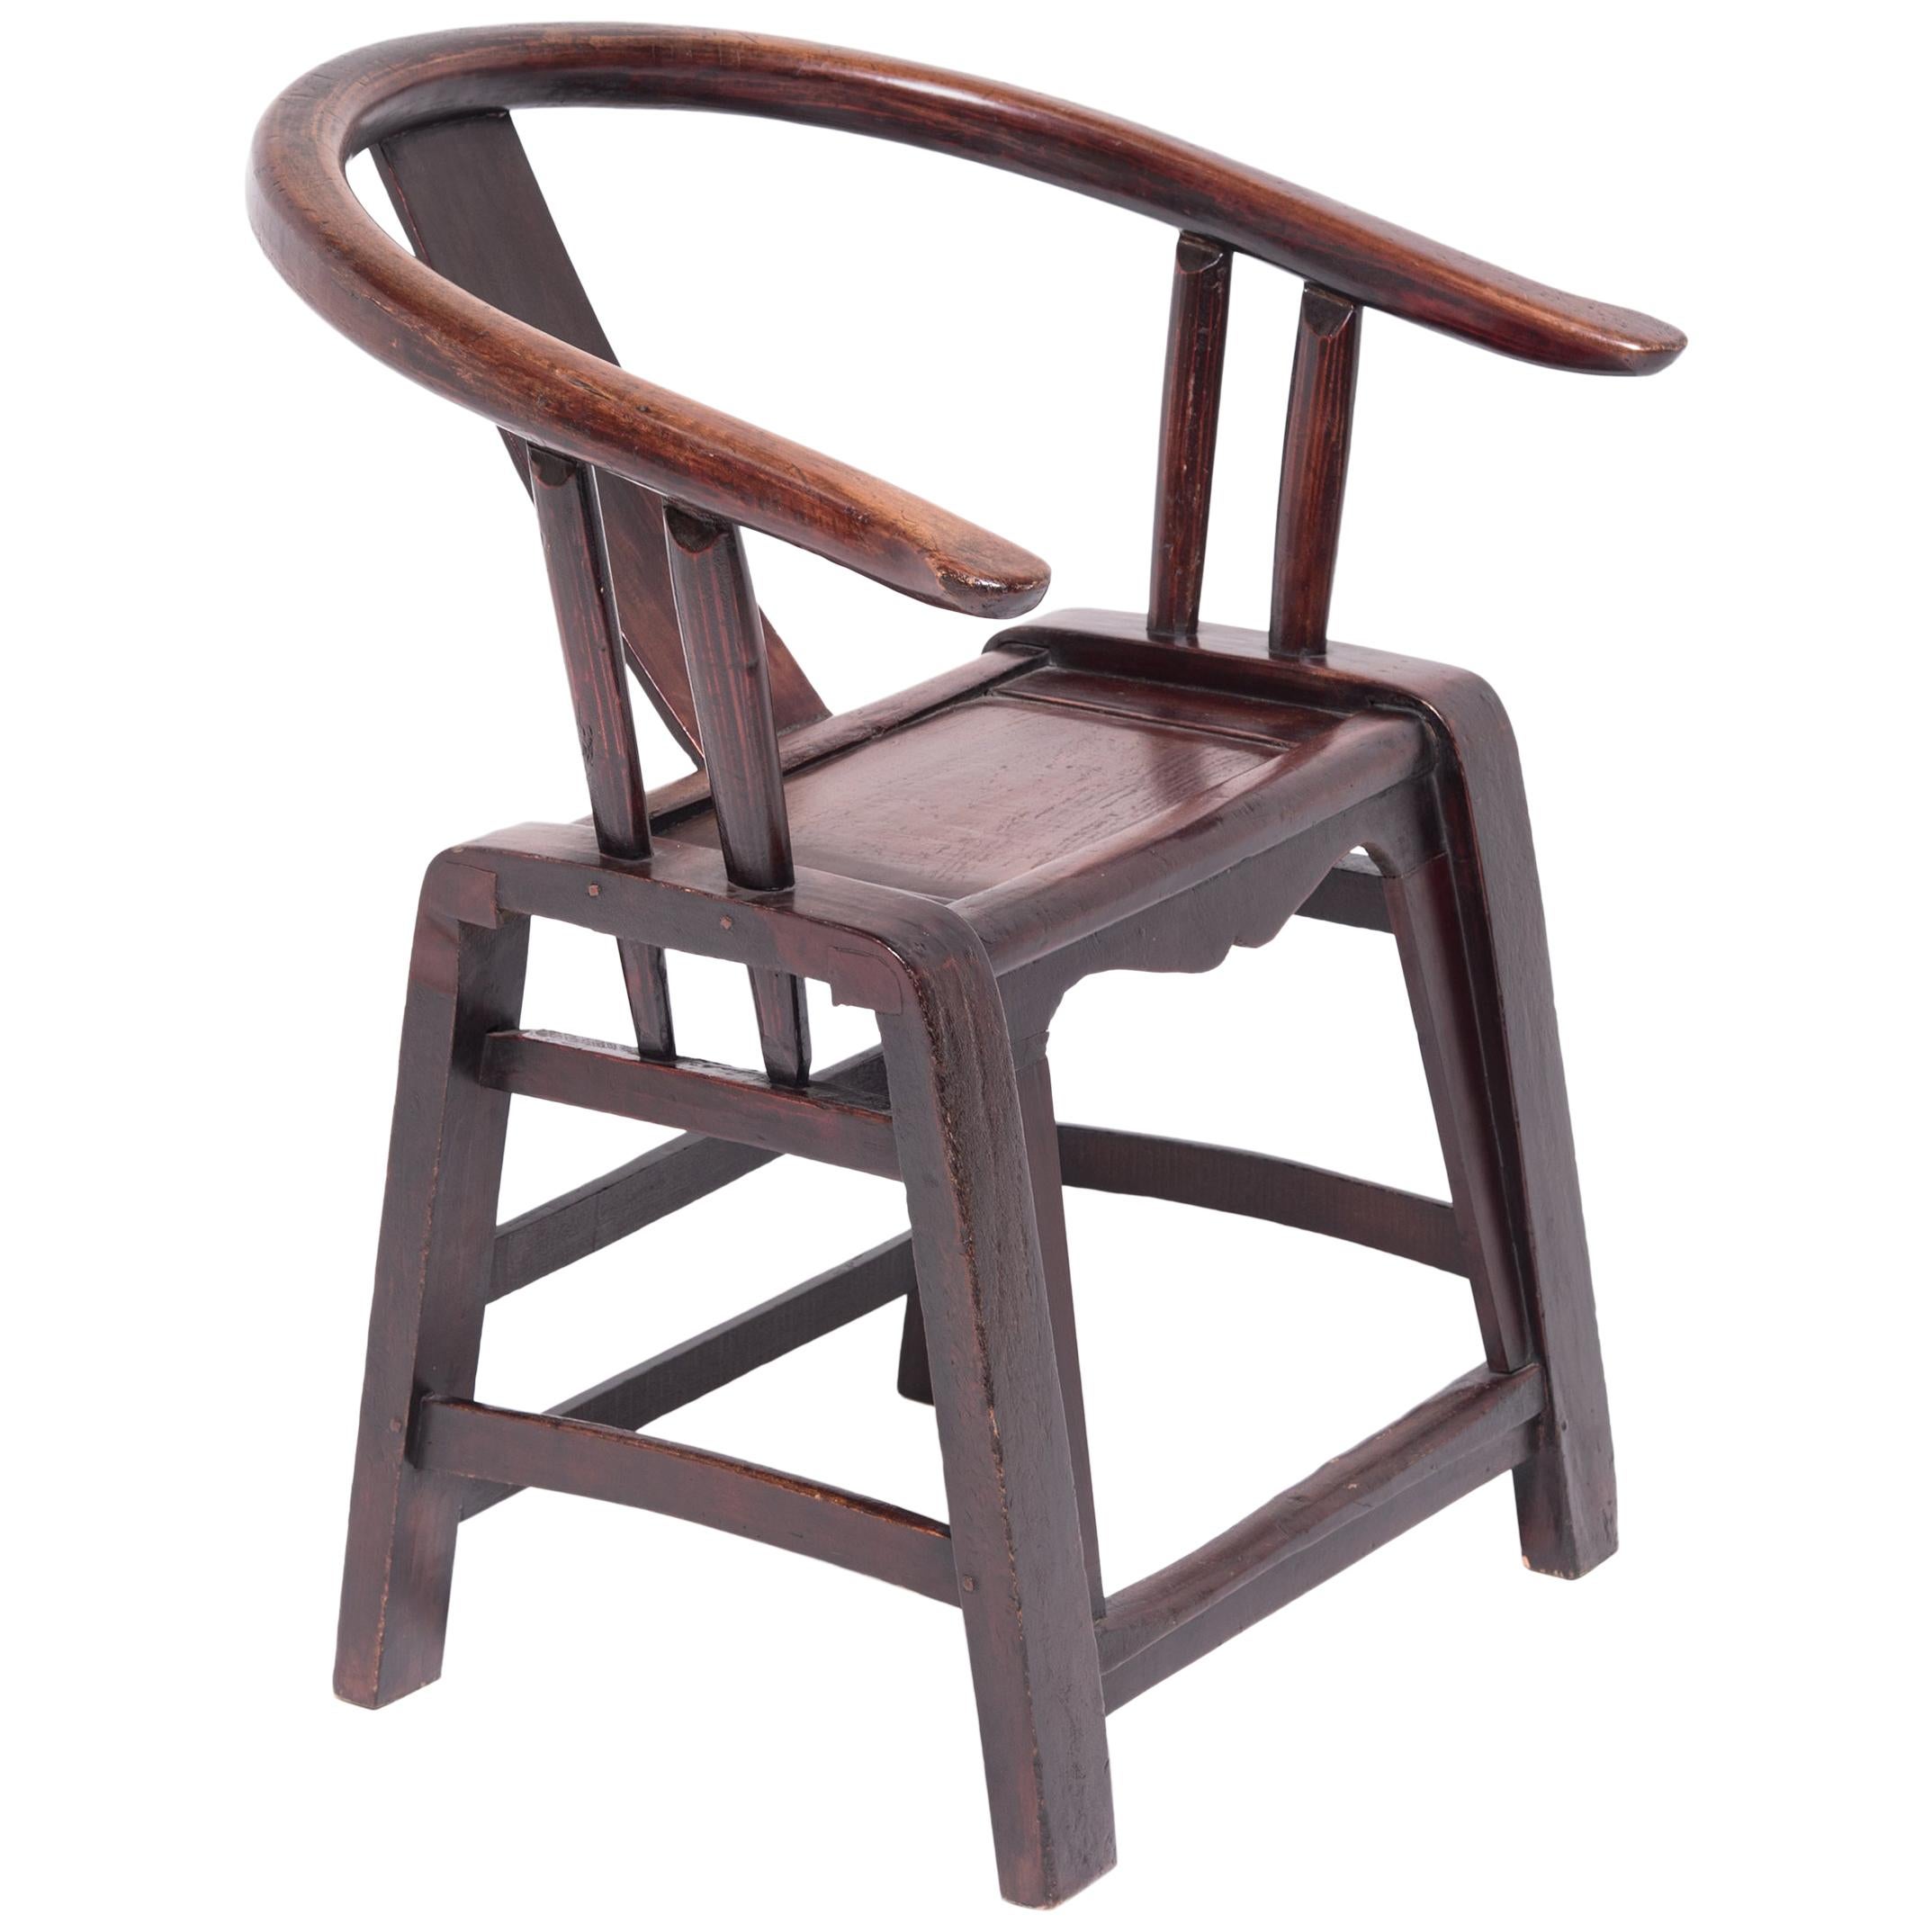 19th Century Provincial Chinese Roundback Chair